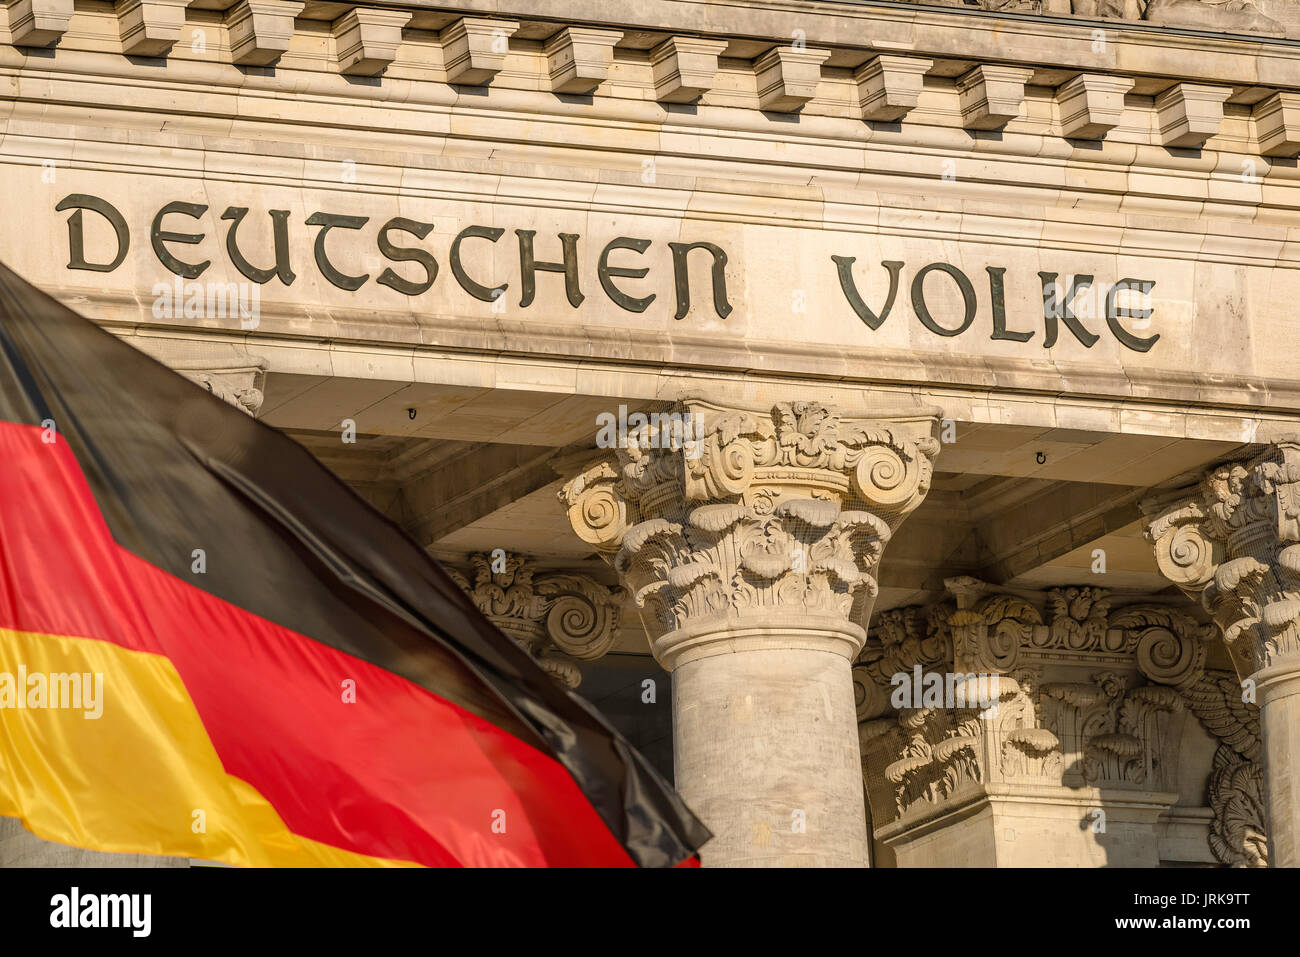 Berlin Reichstag front, detail of inscription on the facade of the German parliament building (the Bundestag) in Berlin with flag in foreground. Stock Photo